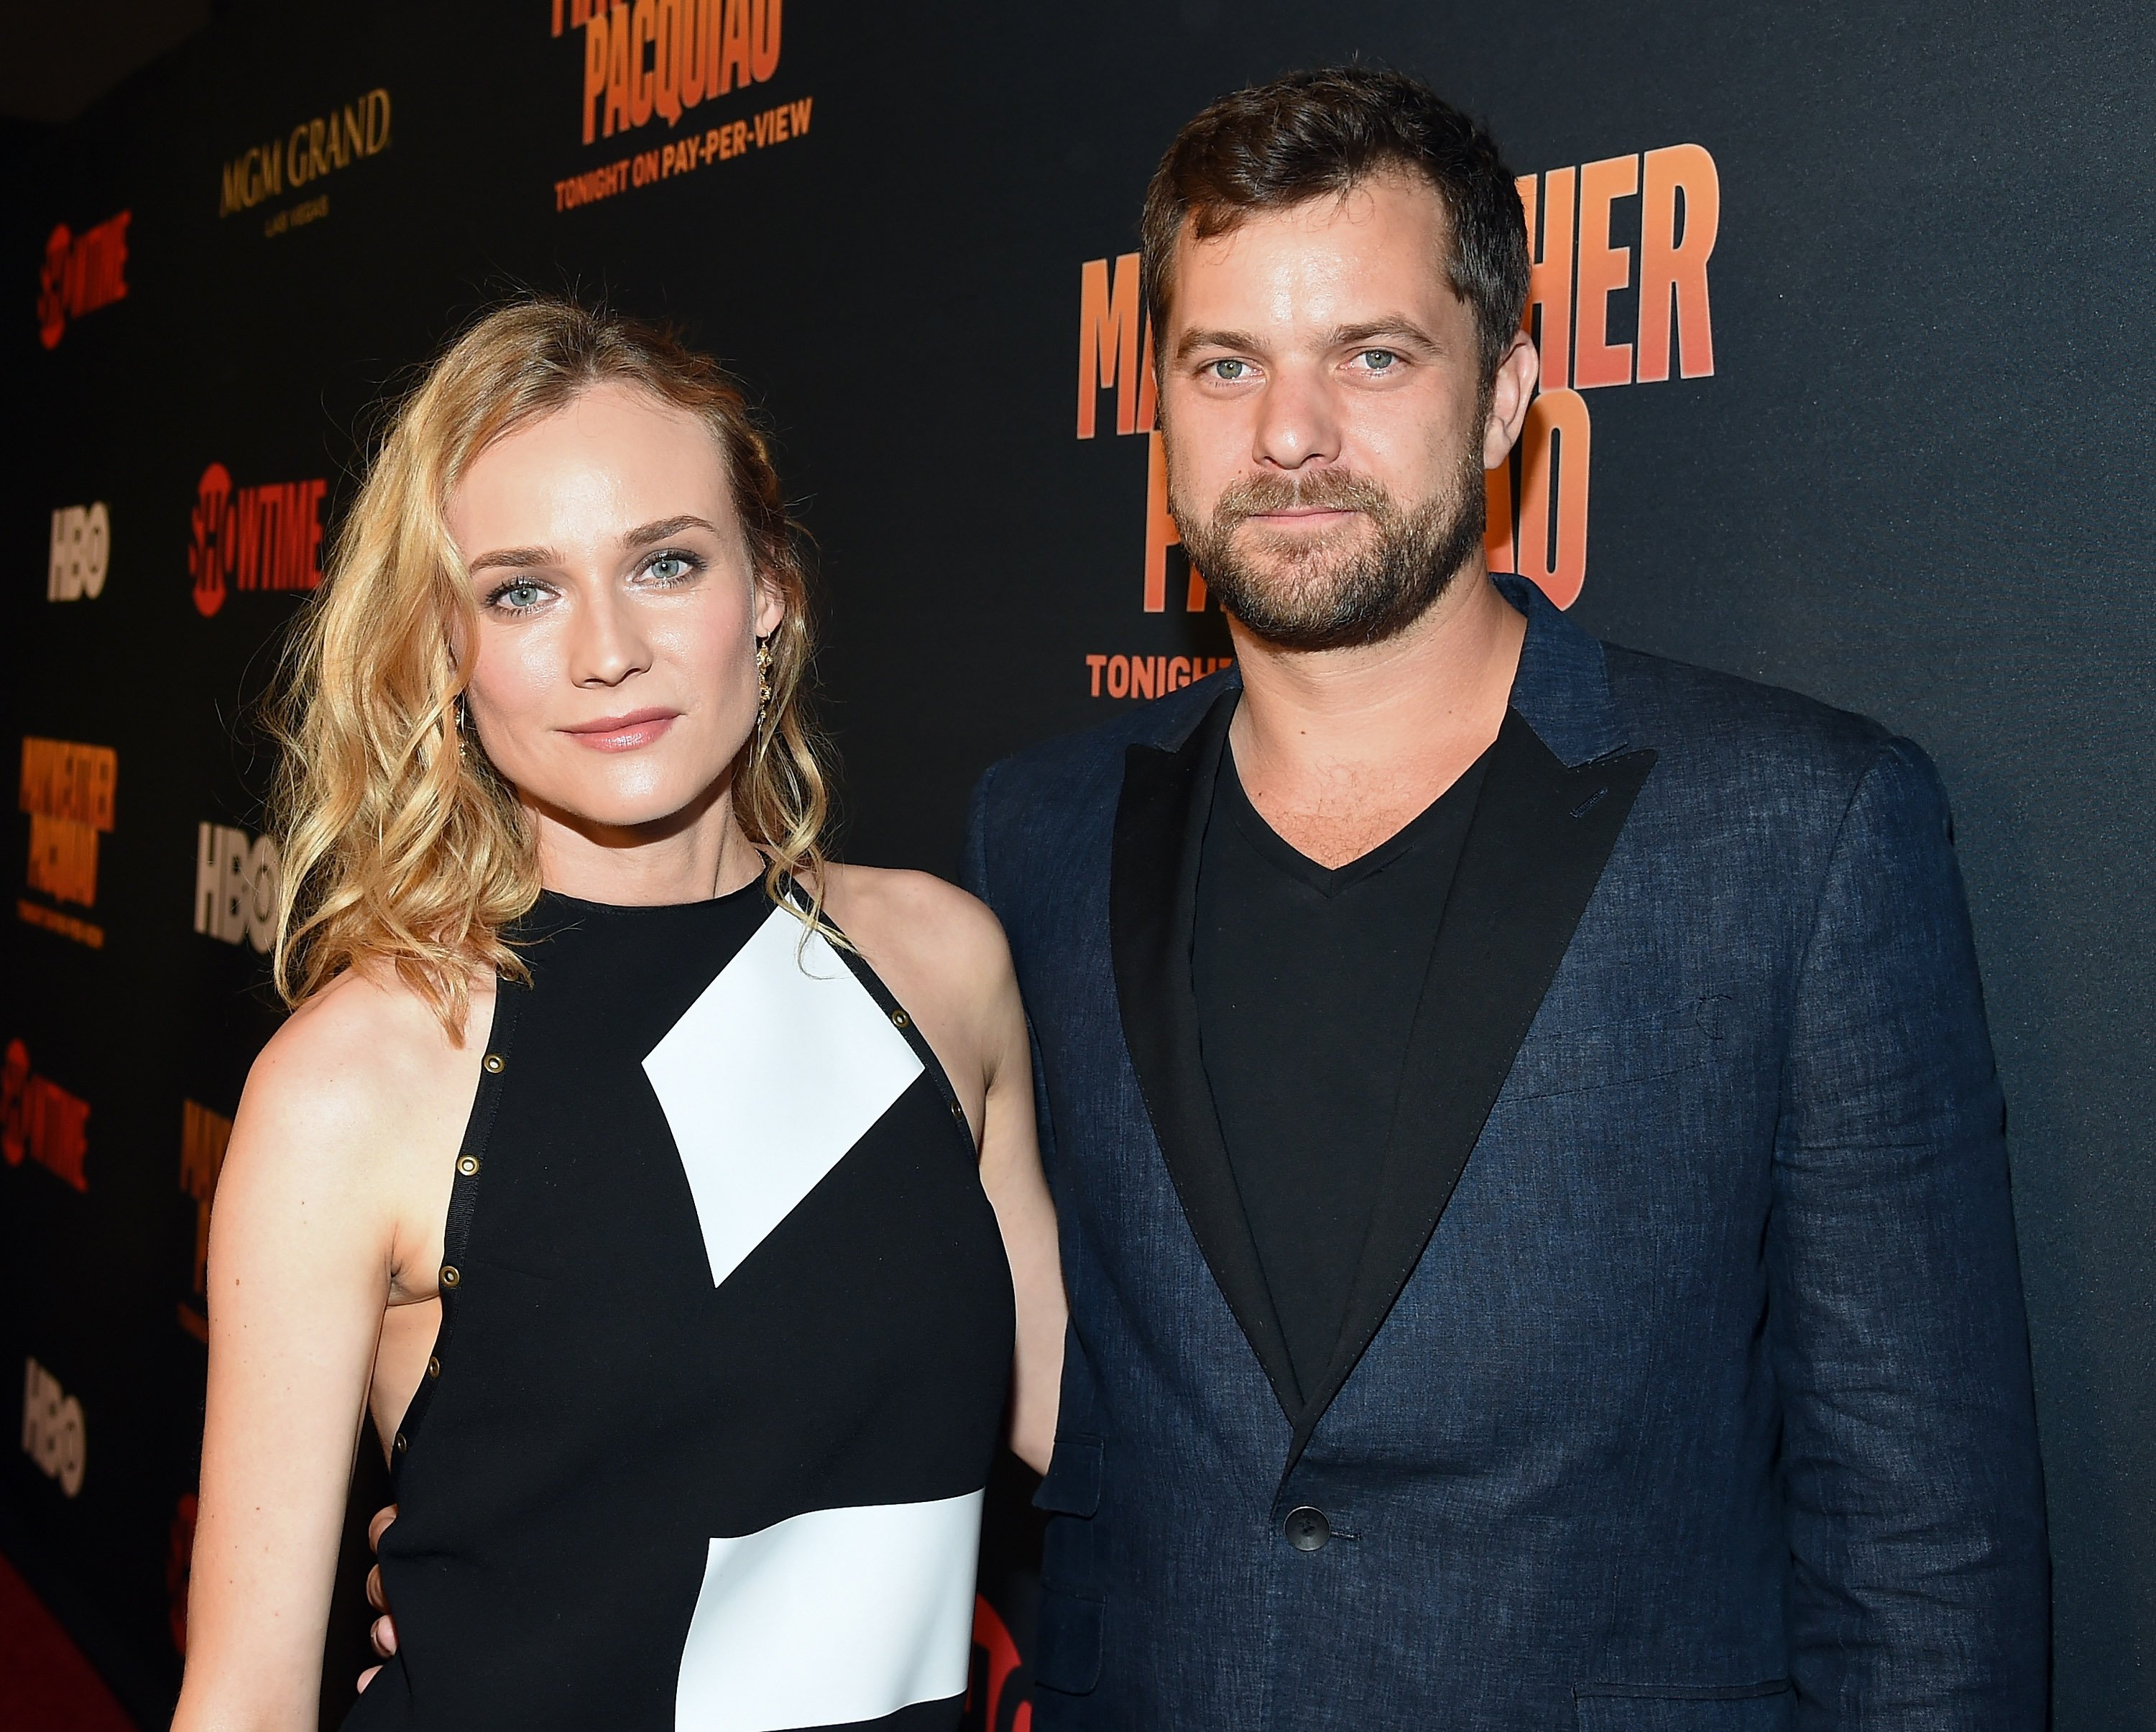 Joshua Jackson and Diane Kruger attend the SHOWTIME And HBO VIP Pre-Fight Party for 'Mayweather VS Pacquiao' at MGM Grand Hotel & Casino in Las Vegas, Nevada | Photo: Getty Images/GlobalImagesUkraine